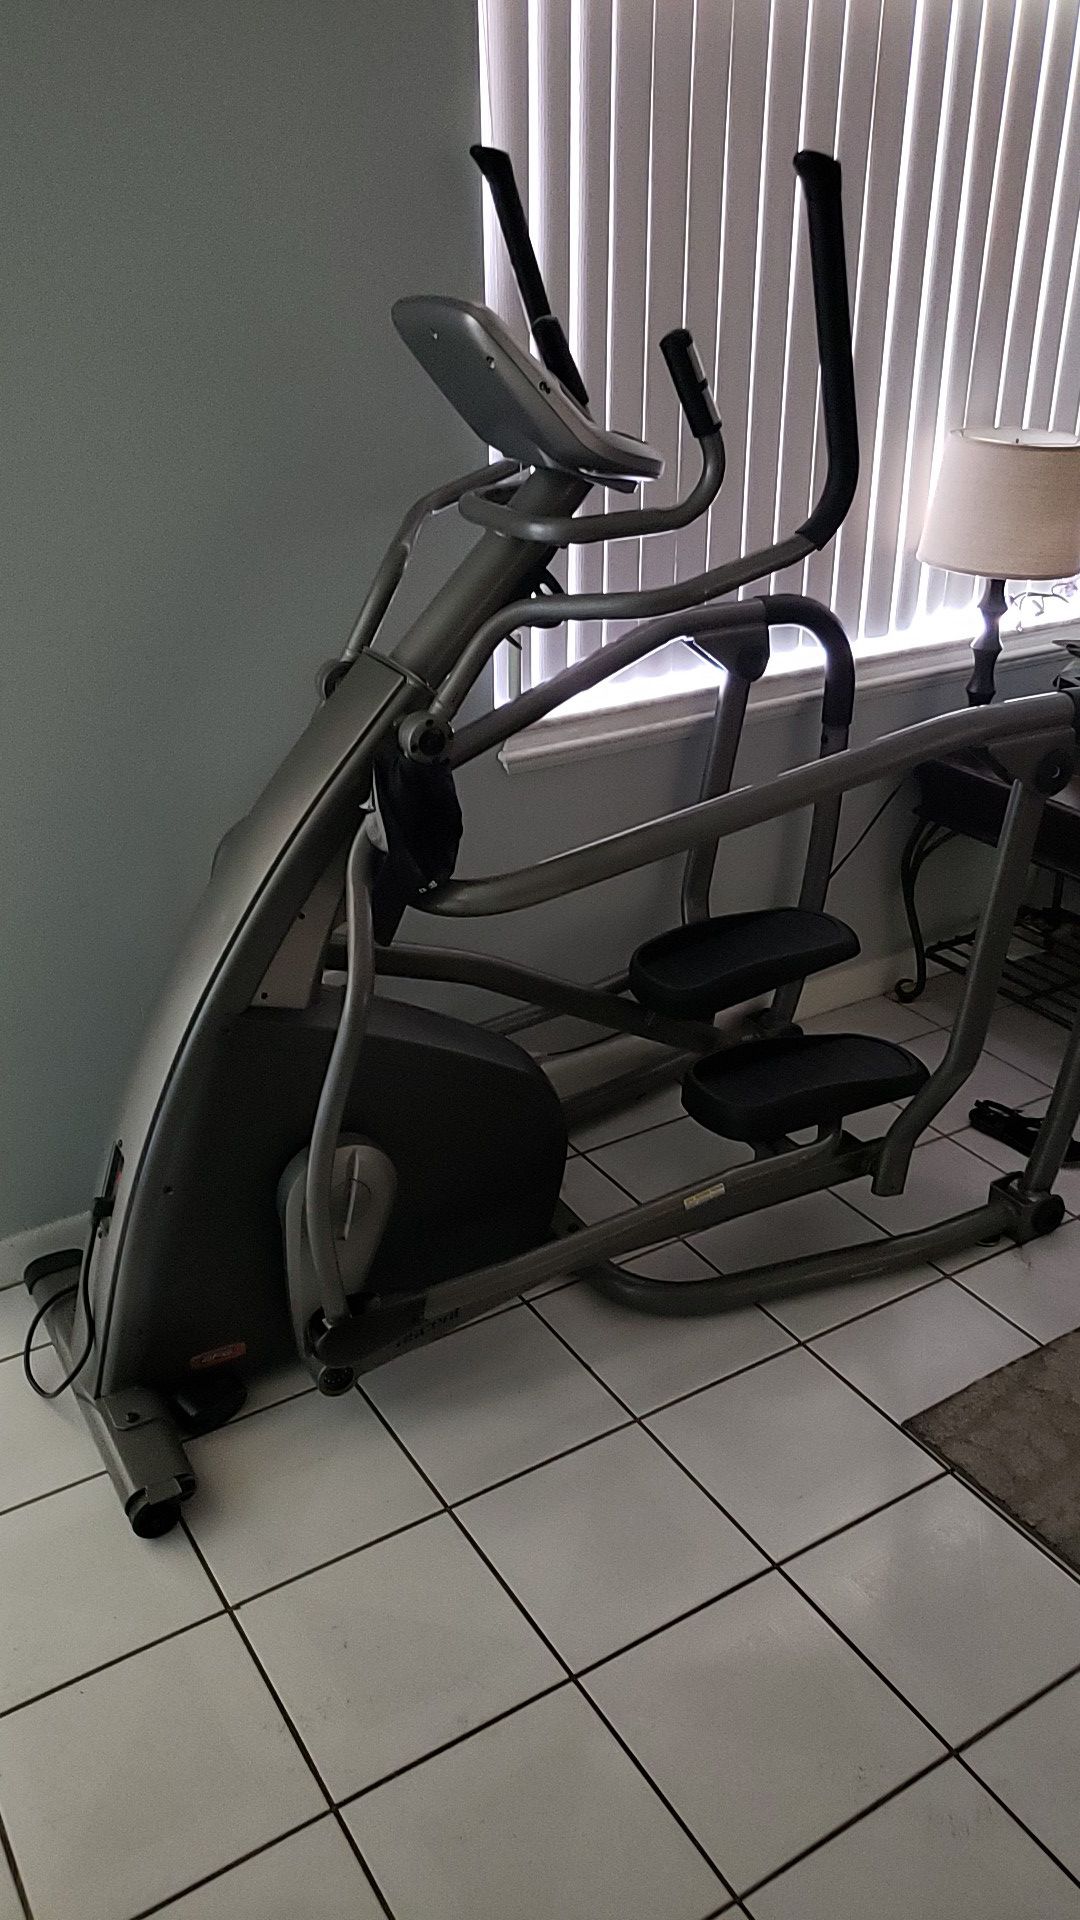 18.1axt elliptical for sale MUST GO !!!